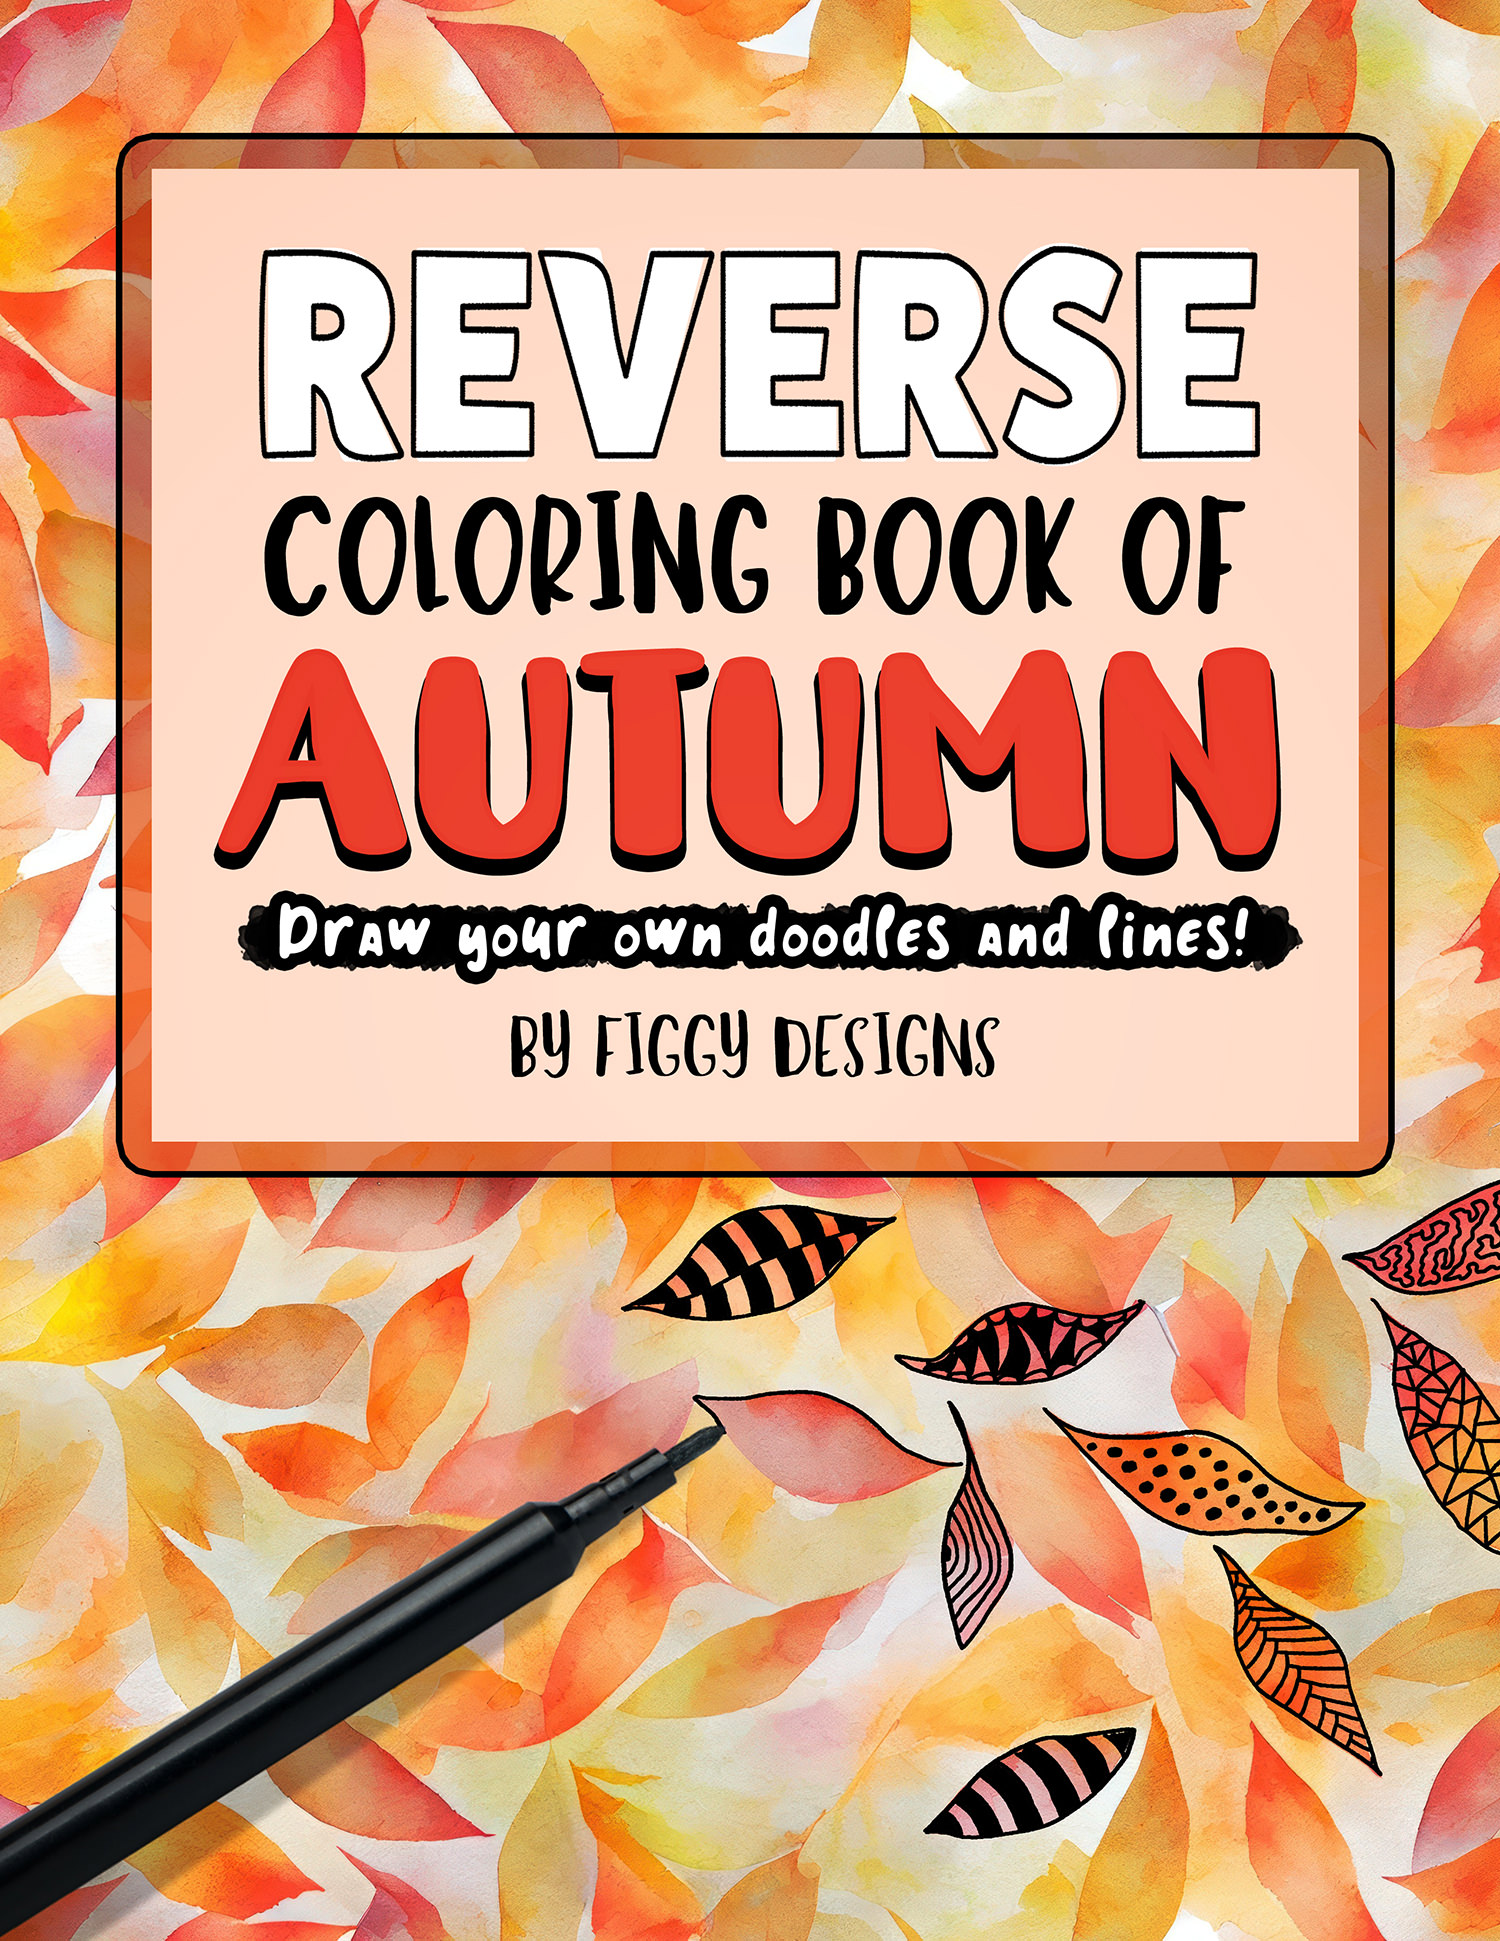 Reverse Coloring Book of Autumn